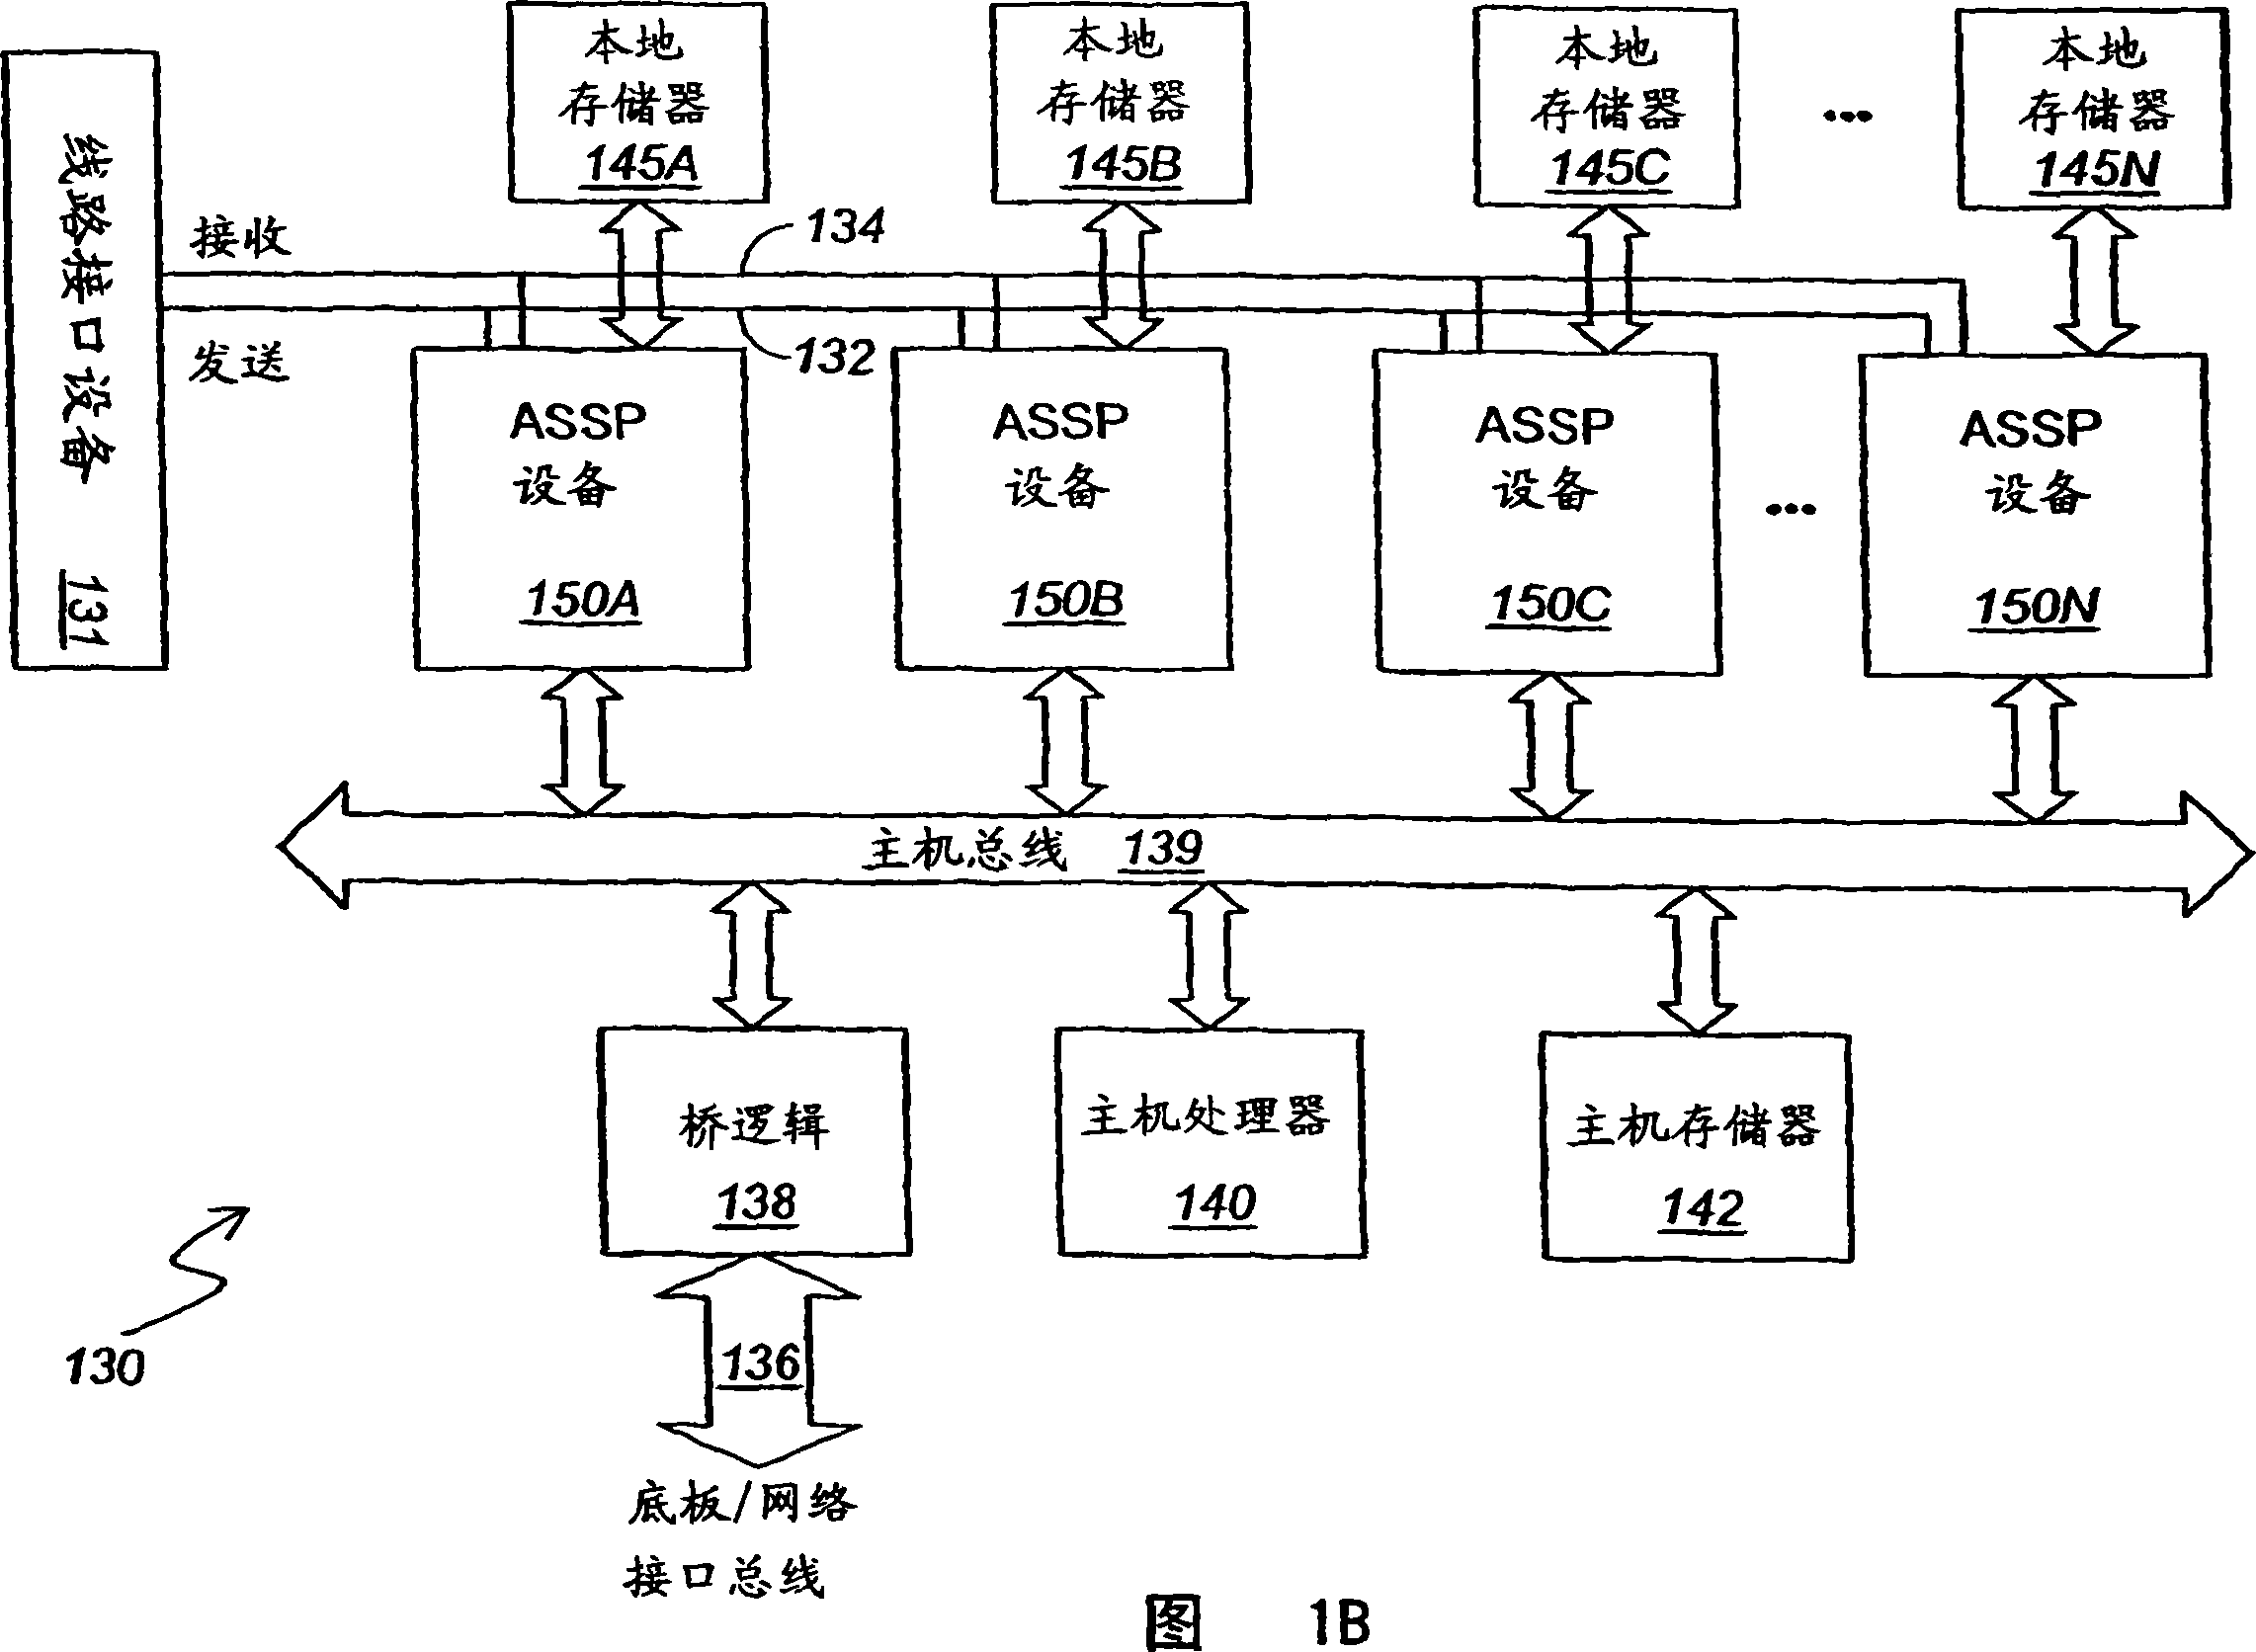 Method and apparatus for flexible data types